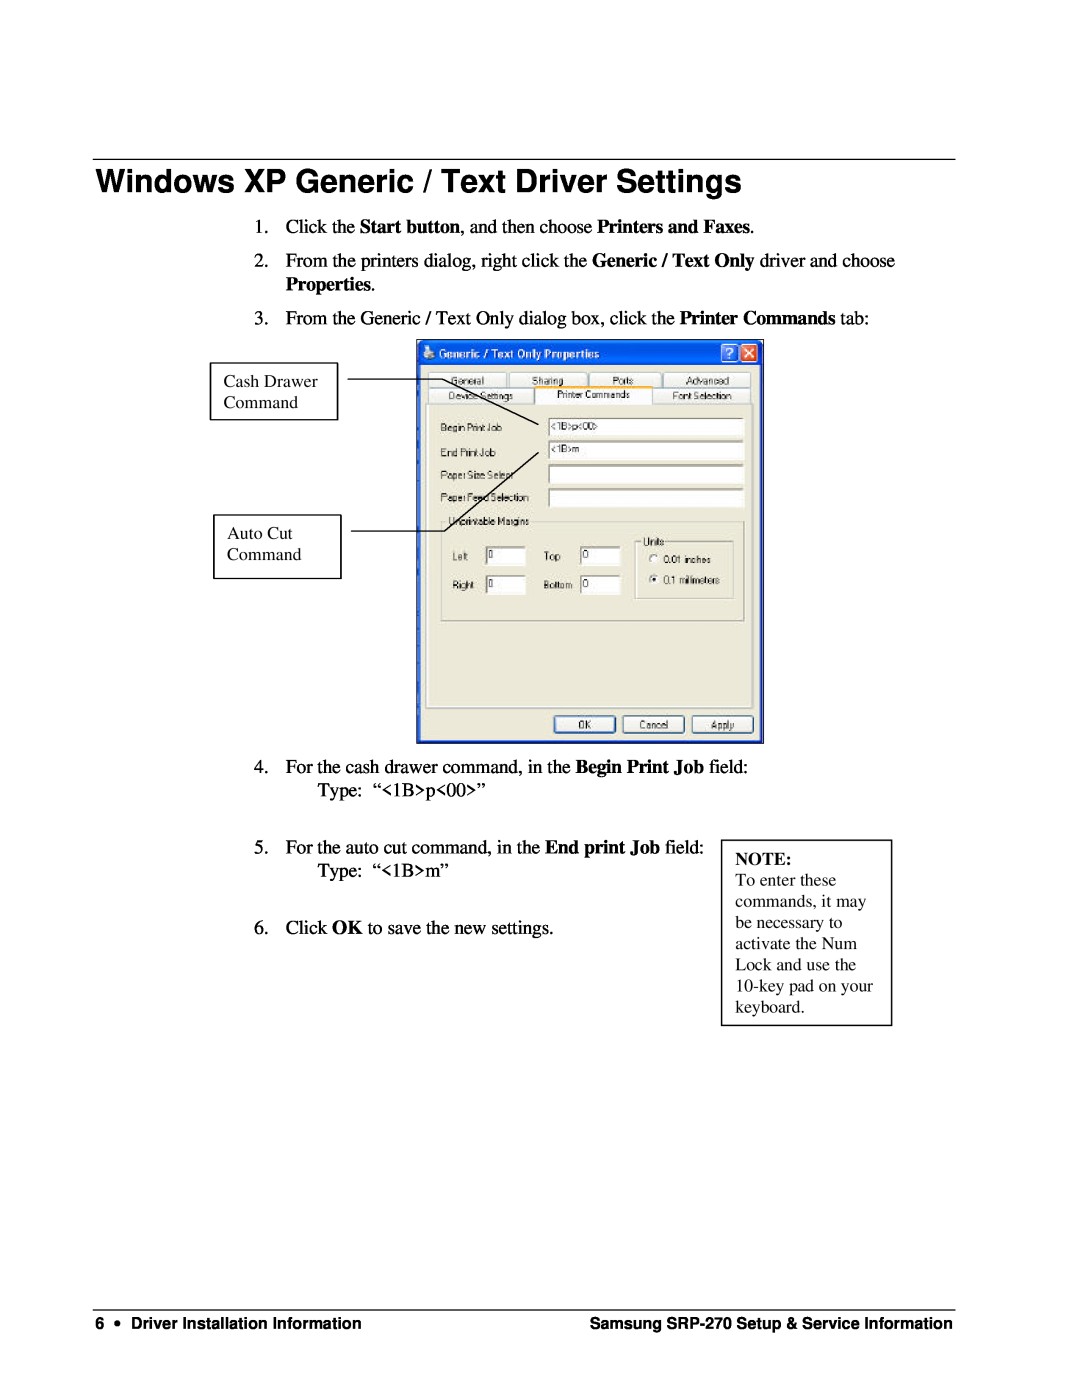 Samsung SRP-270 Windows XP Generic / Text Driver Settings, Click the Start button, and then choose Printers and Faxes 